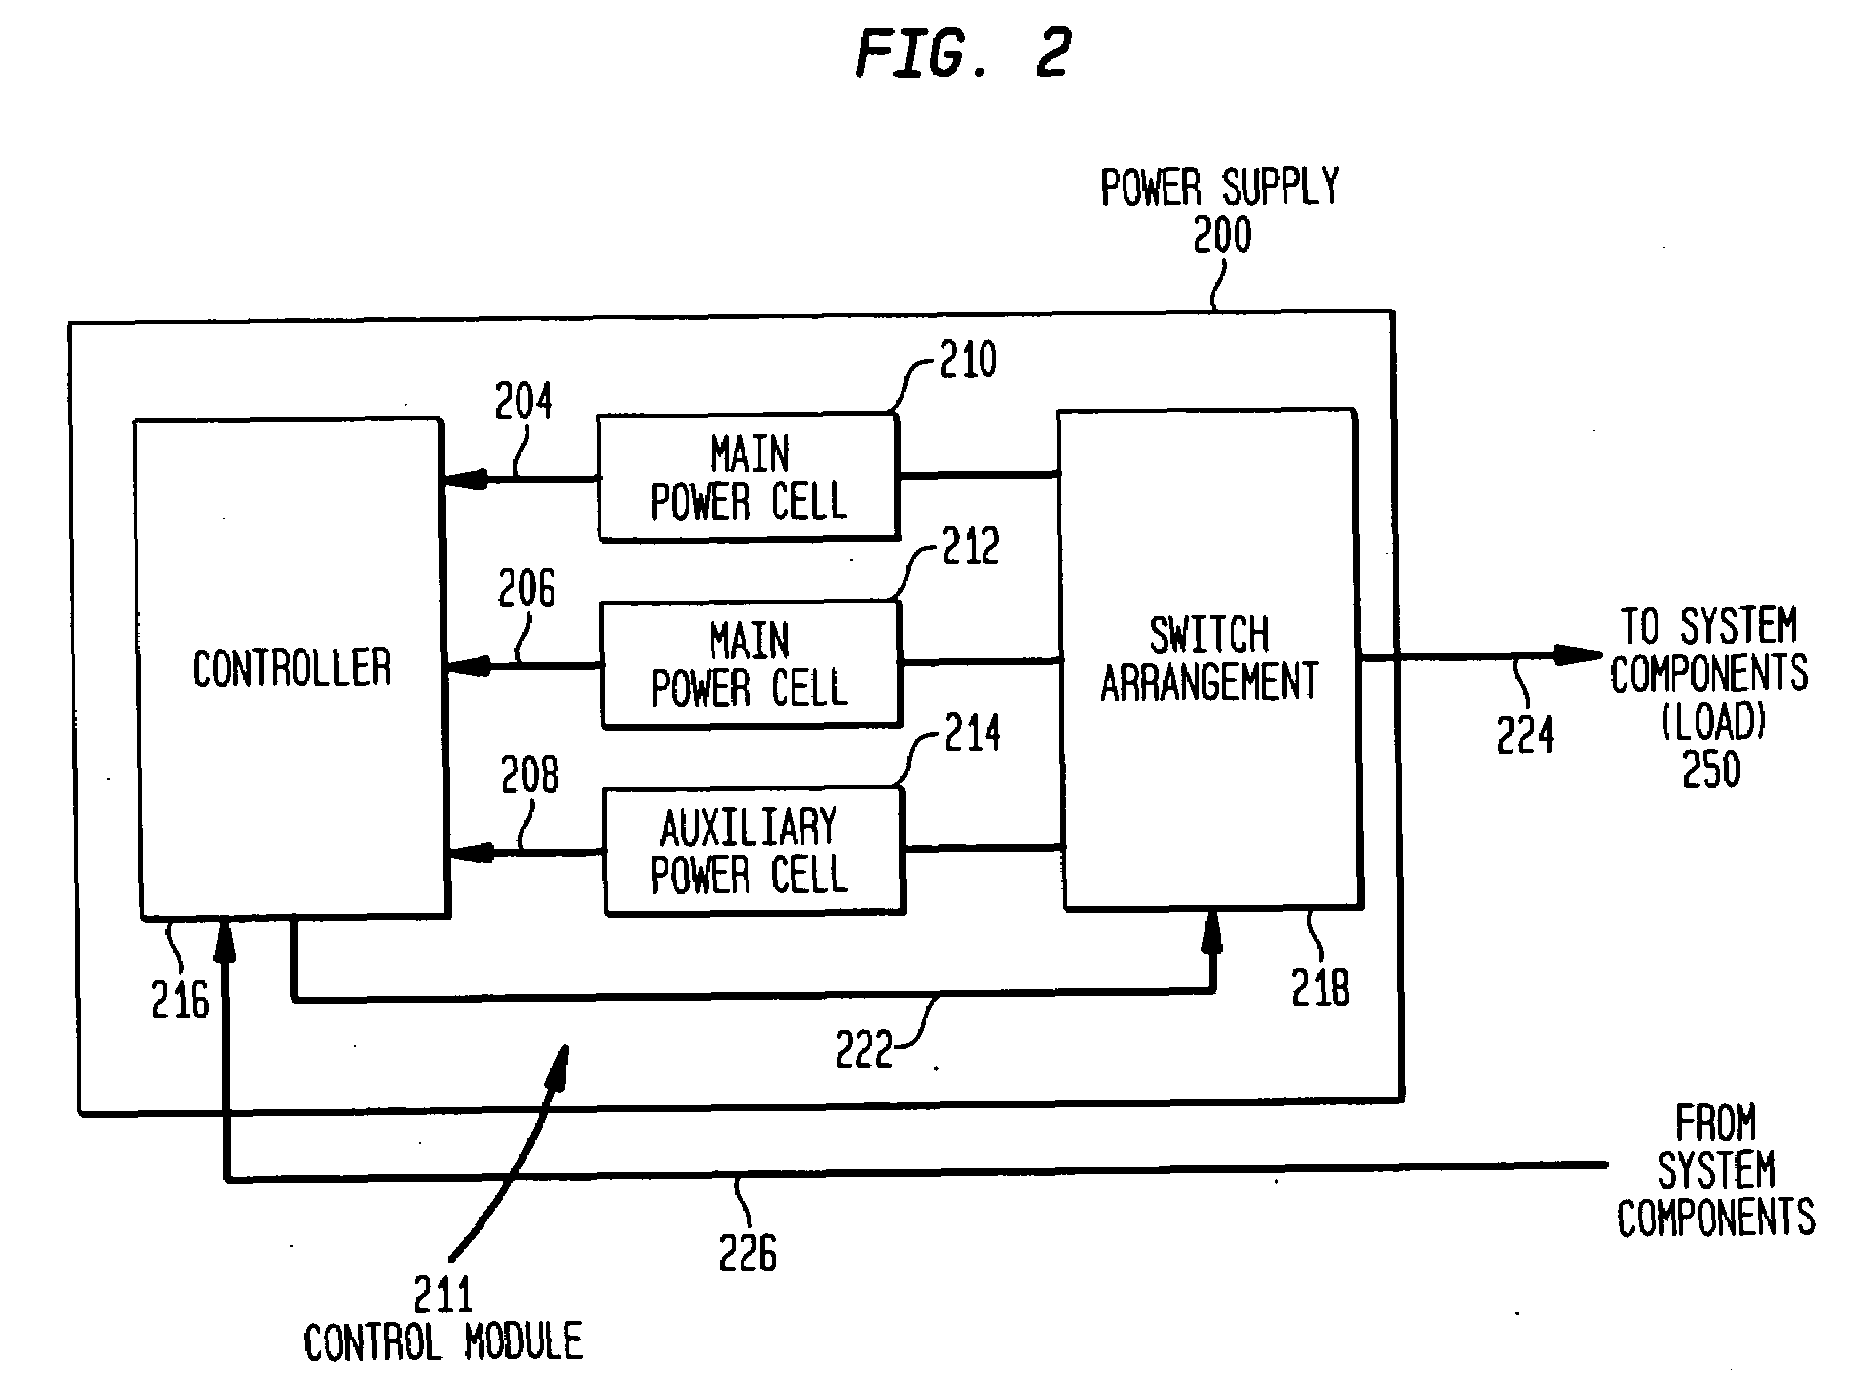 Power supply having an auxiliary power cell